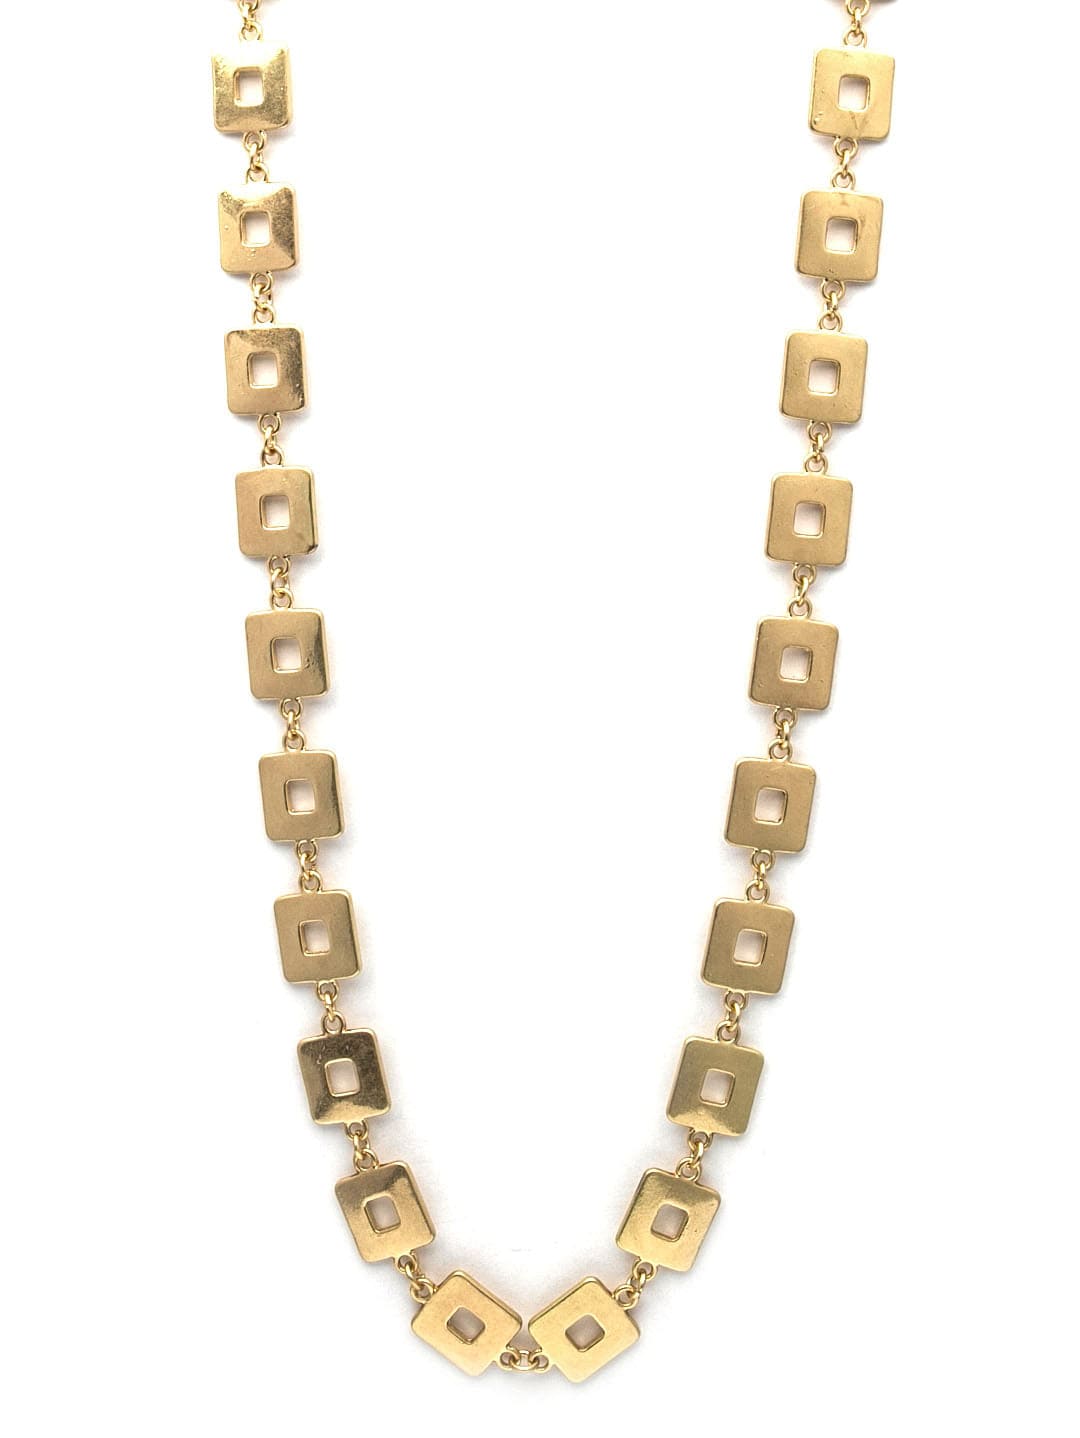 Envy Trinny Gold Necklace With Square Links - Crabtree Cottage